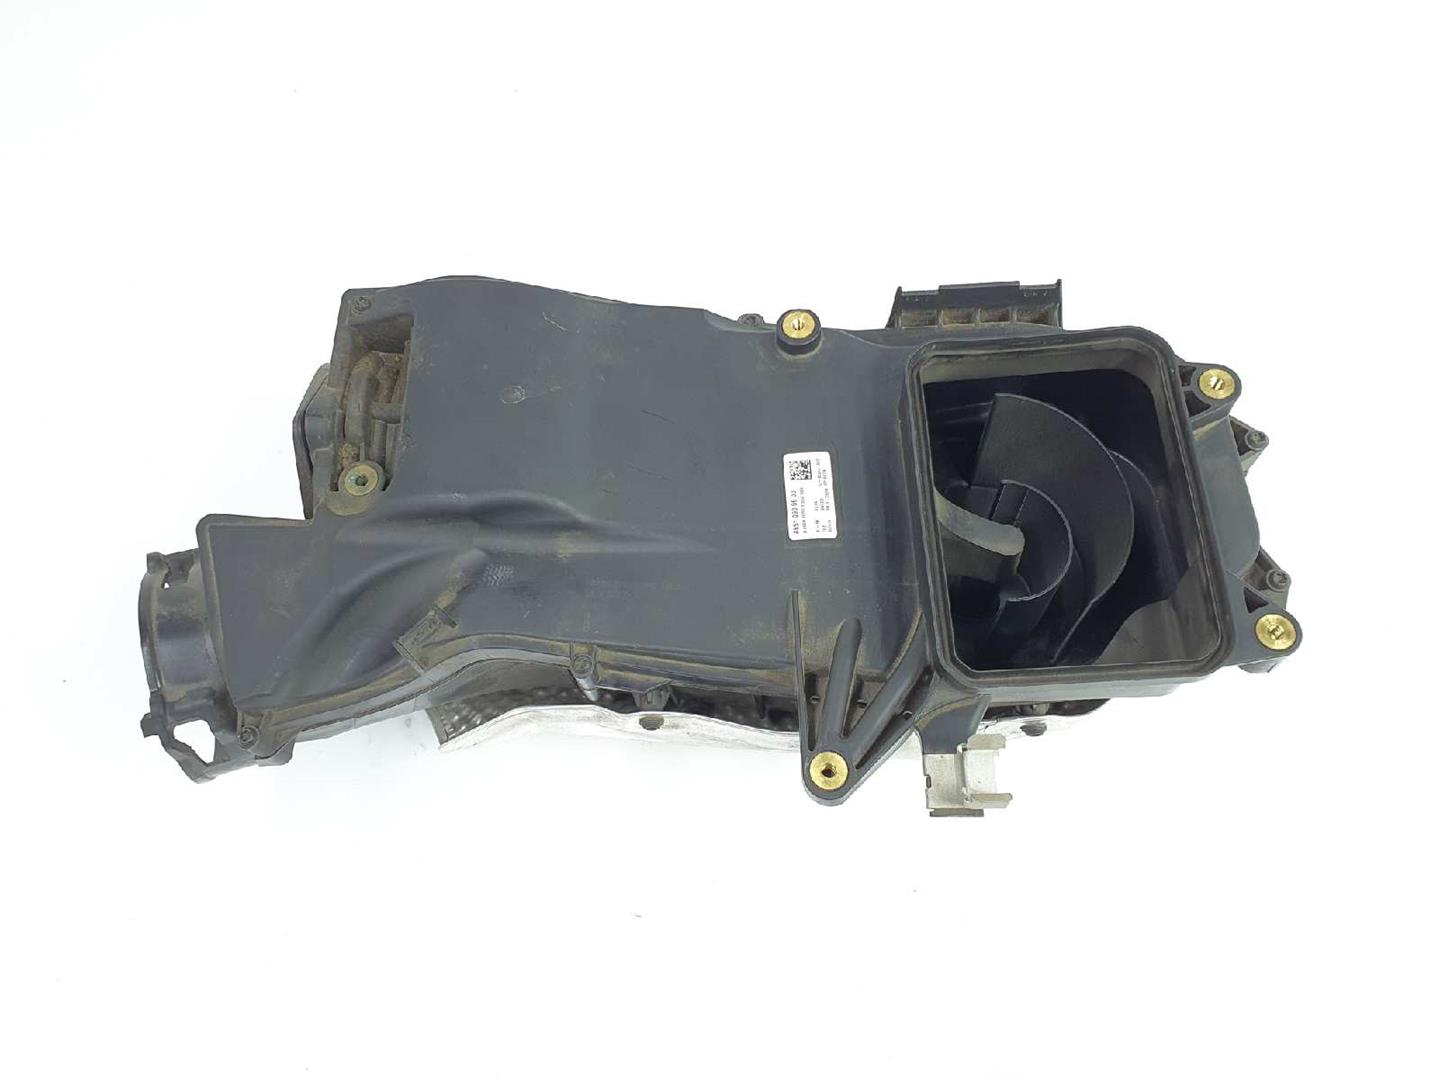 MERCEDES-BENZ C-Class W205/S205/C205 (2014-2023) Other Engine Compartment Parts A6510900600, A6510900600, A651090060080 19717291